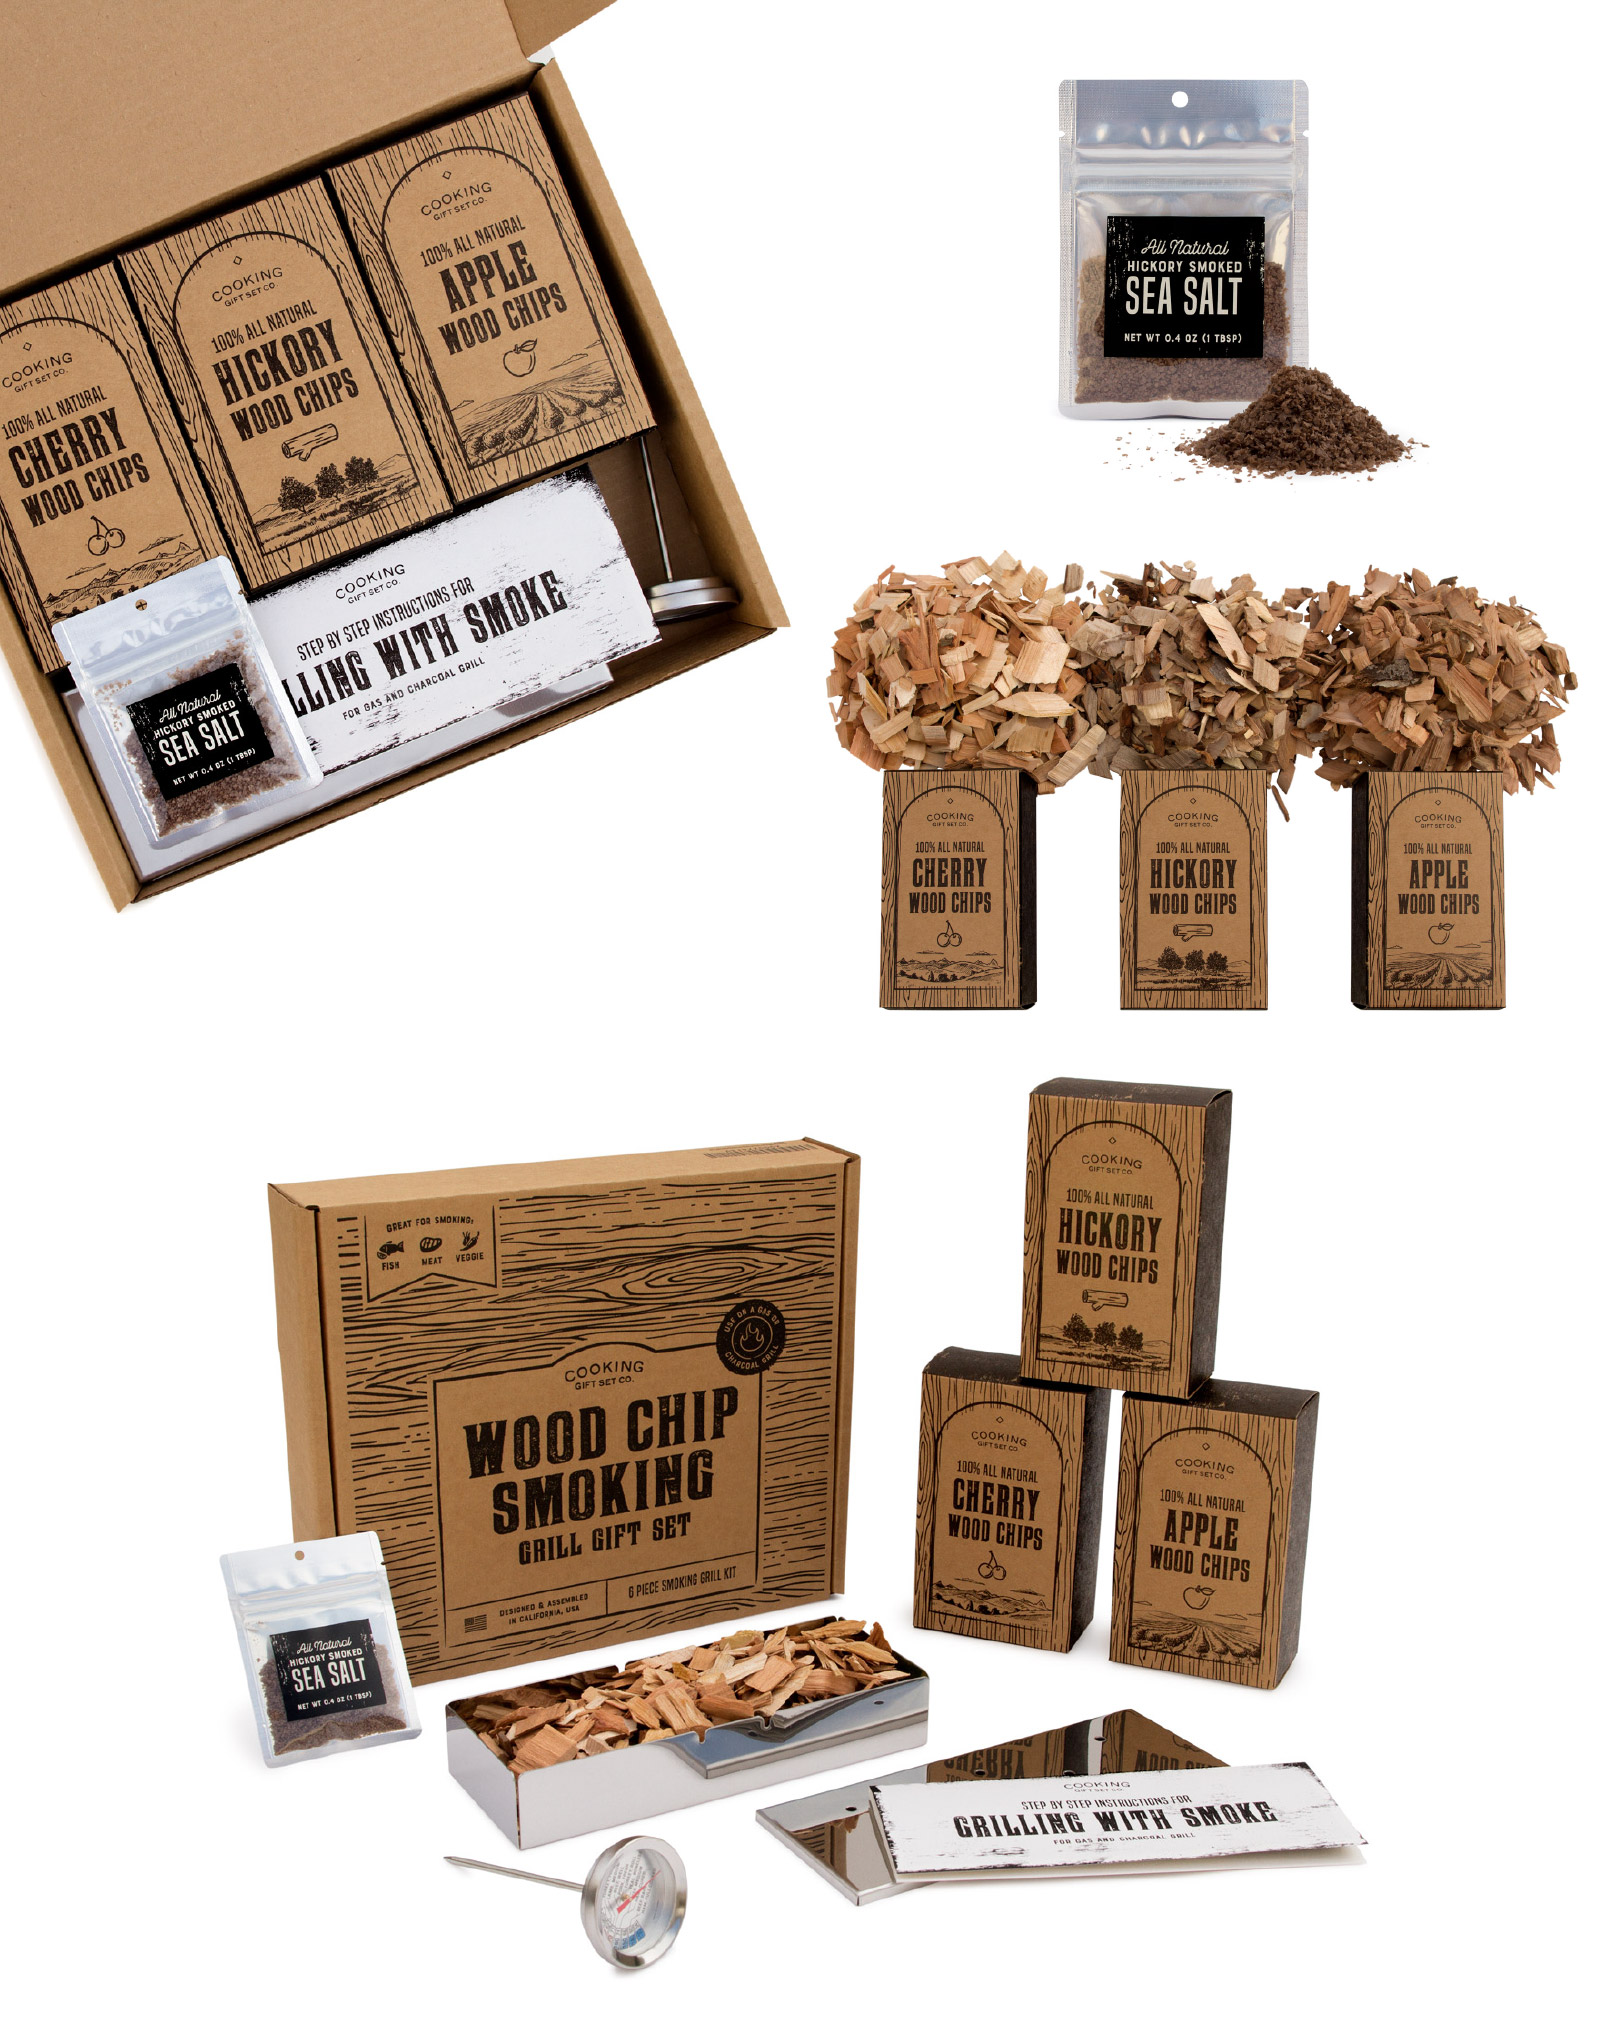 wood chip smoking grill gift set product photos